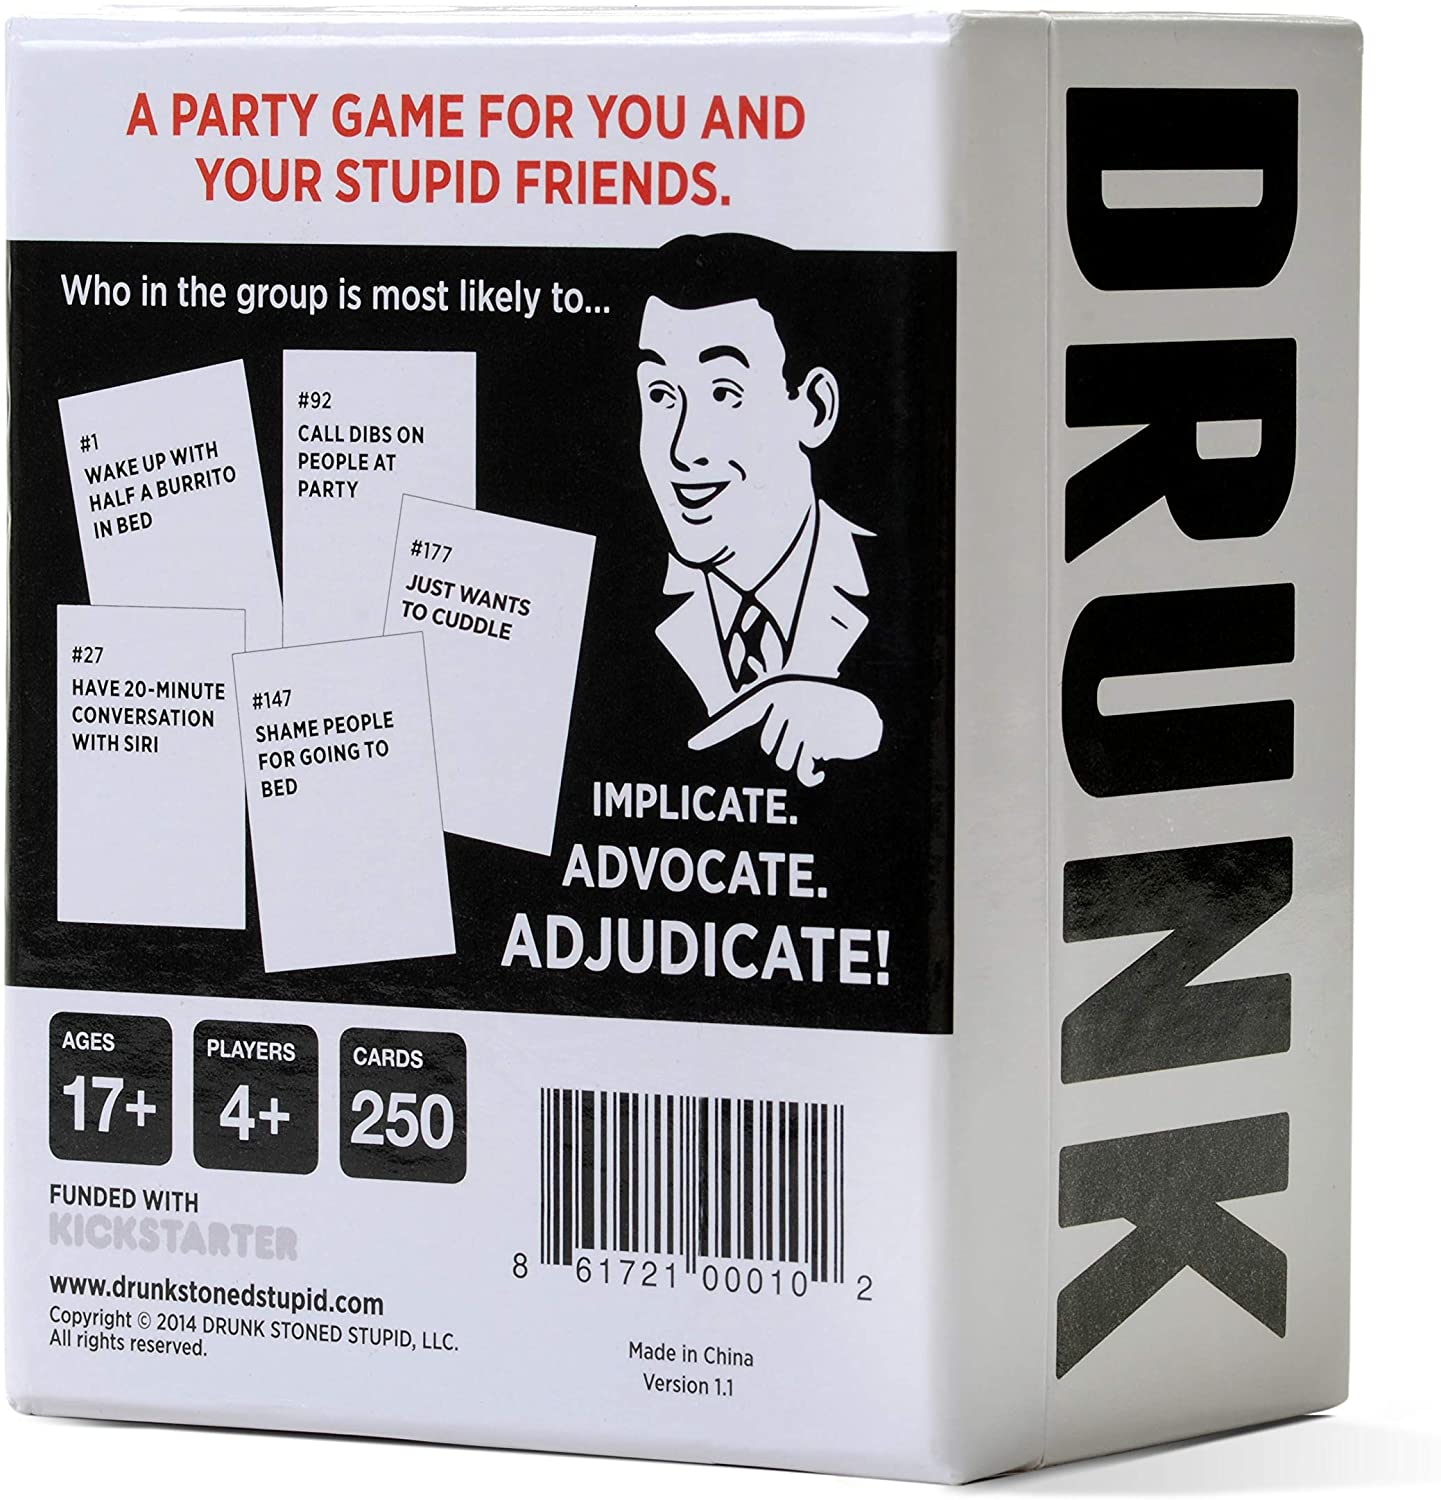 10 Games To Play When You're Drunk That Will Give You A Bigger High